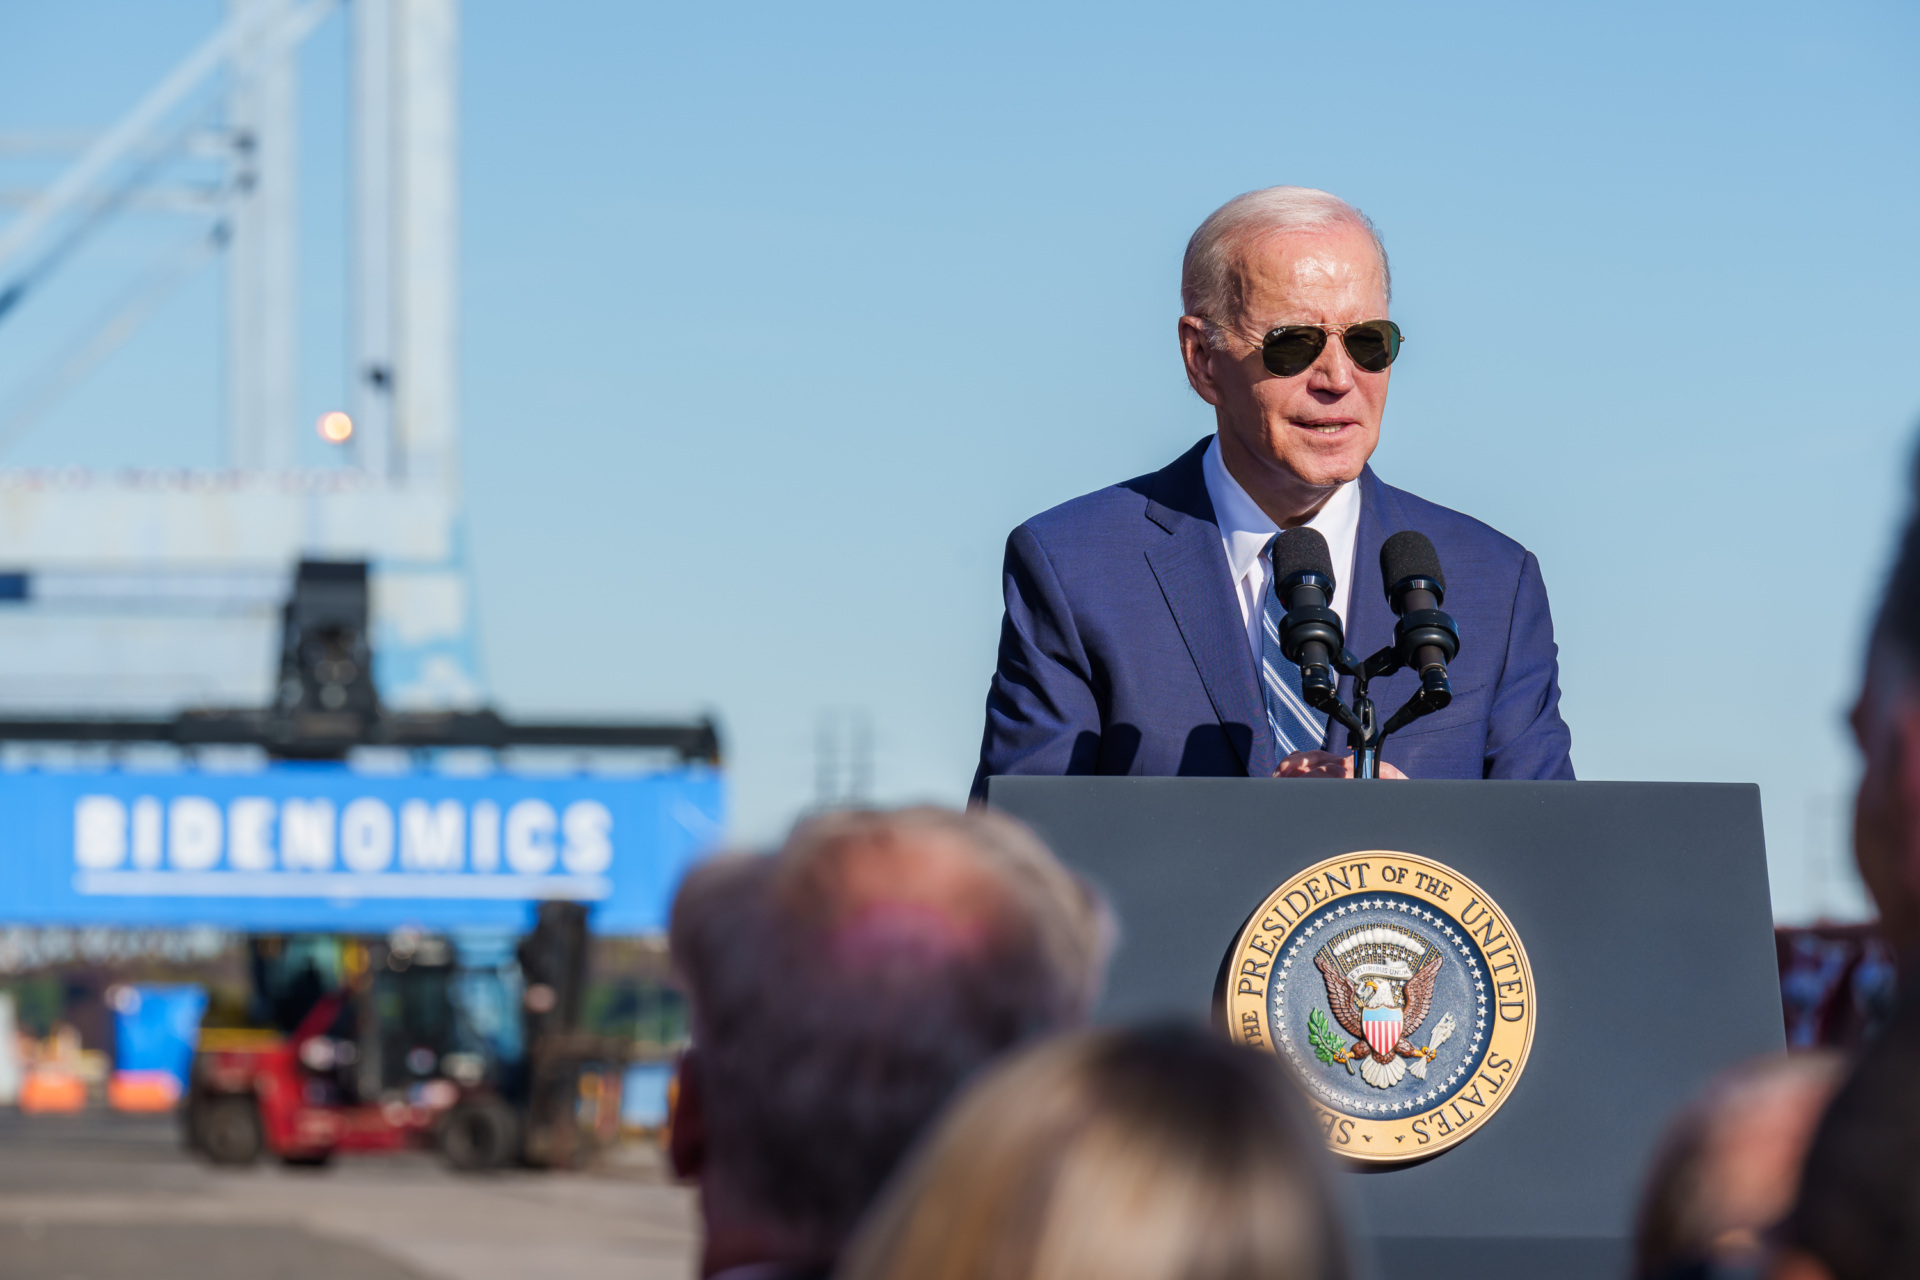 President Joe Biden delivers remarks announcing seven regional clean hydrogen hubs selected to receive funding from the Bipartisan Infrastructure Law to accelerate a clean energy economy and new jobs, Friday, October 13, 2023, at Tioga Marine Terminal in Philadelphia. (Official White House Photo by Adam Schultz)